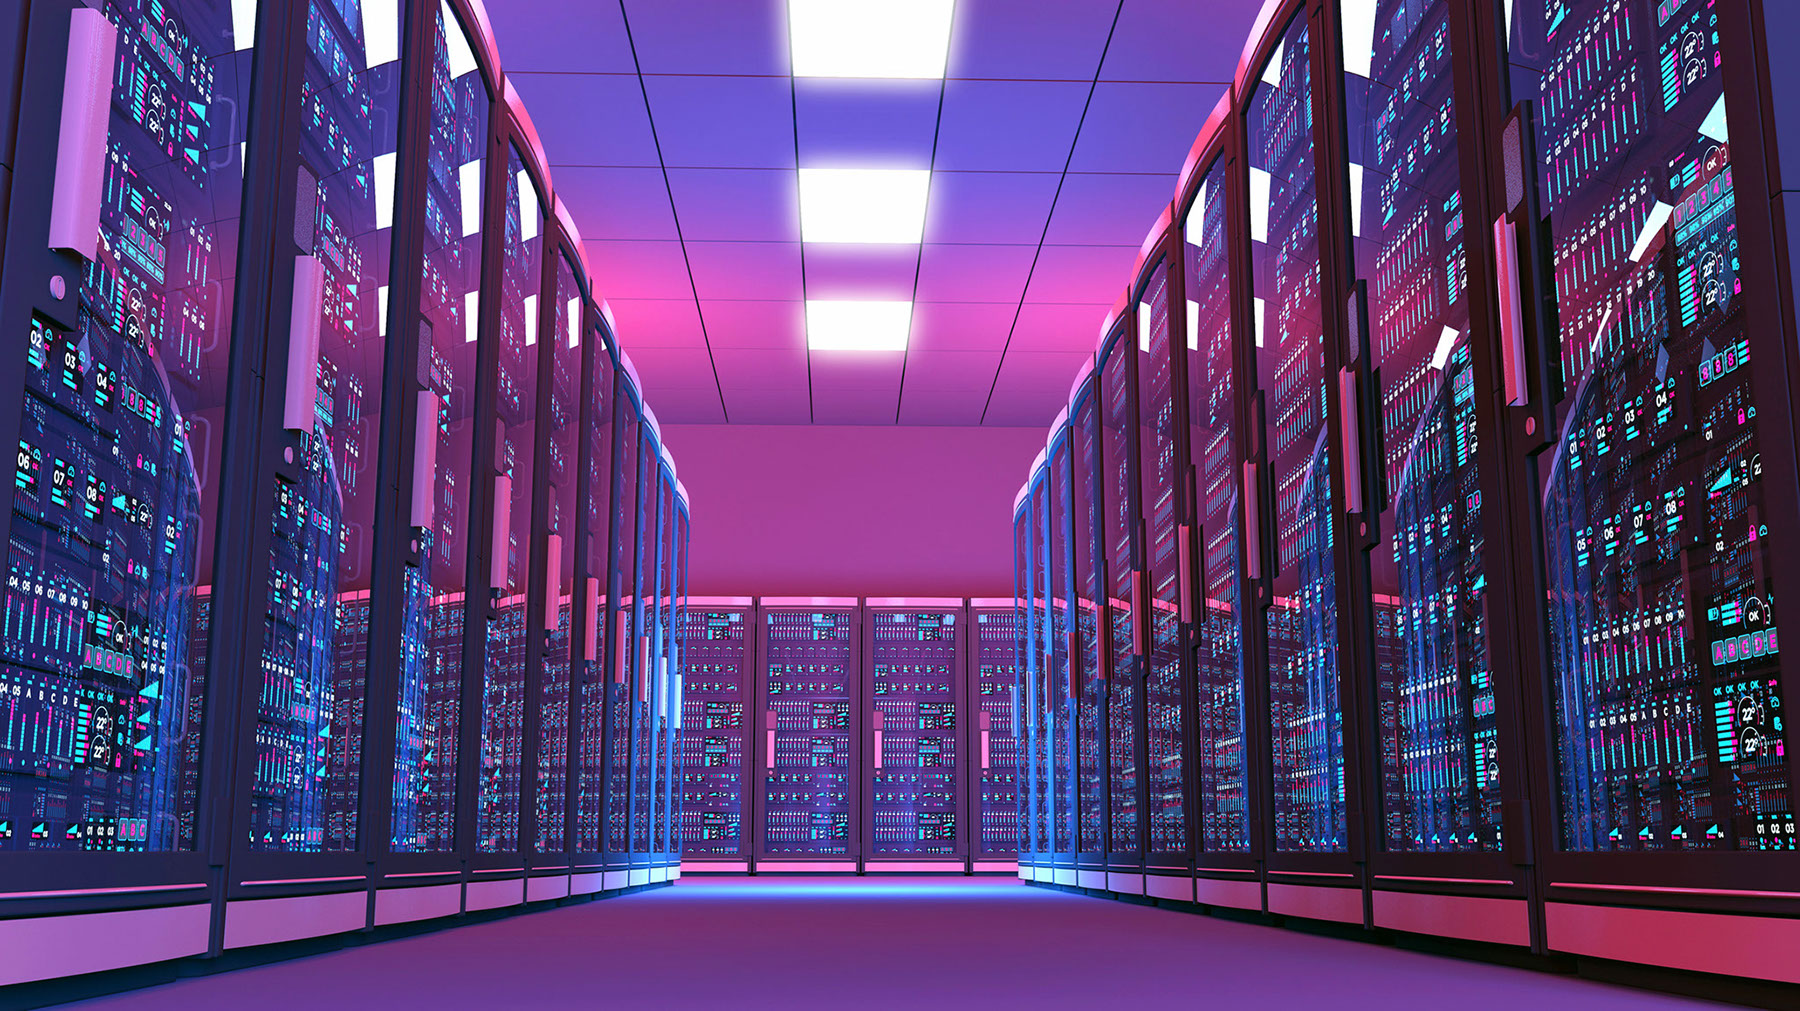 Futuristic Data Center Room Aisle Surrounded By Rows Of Servers Lda